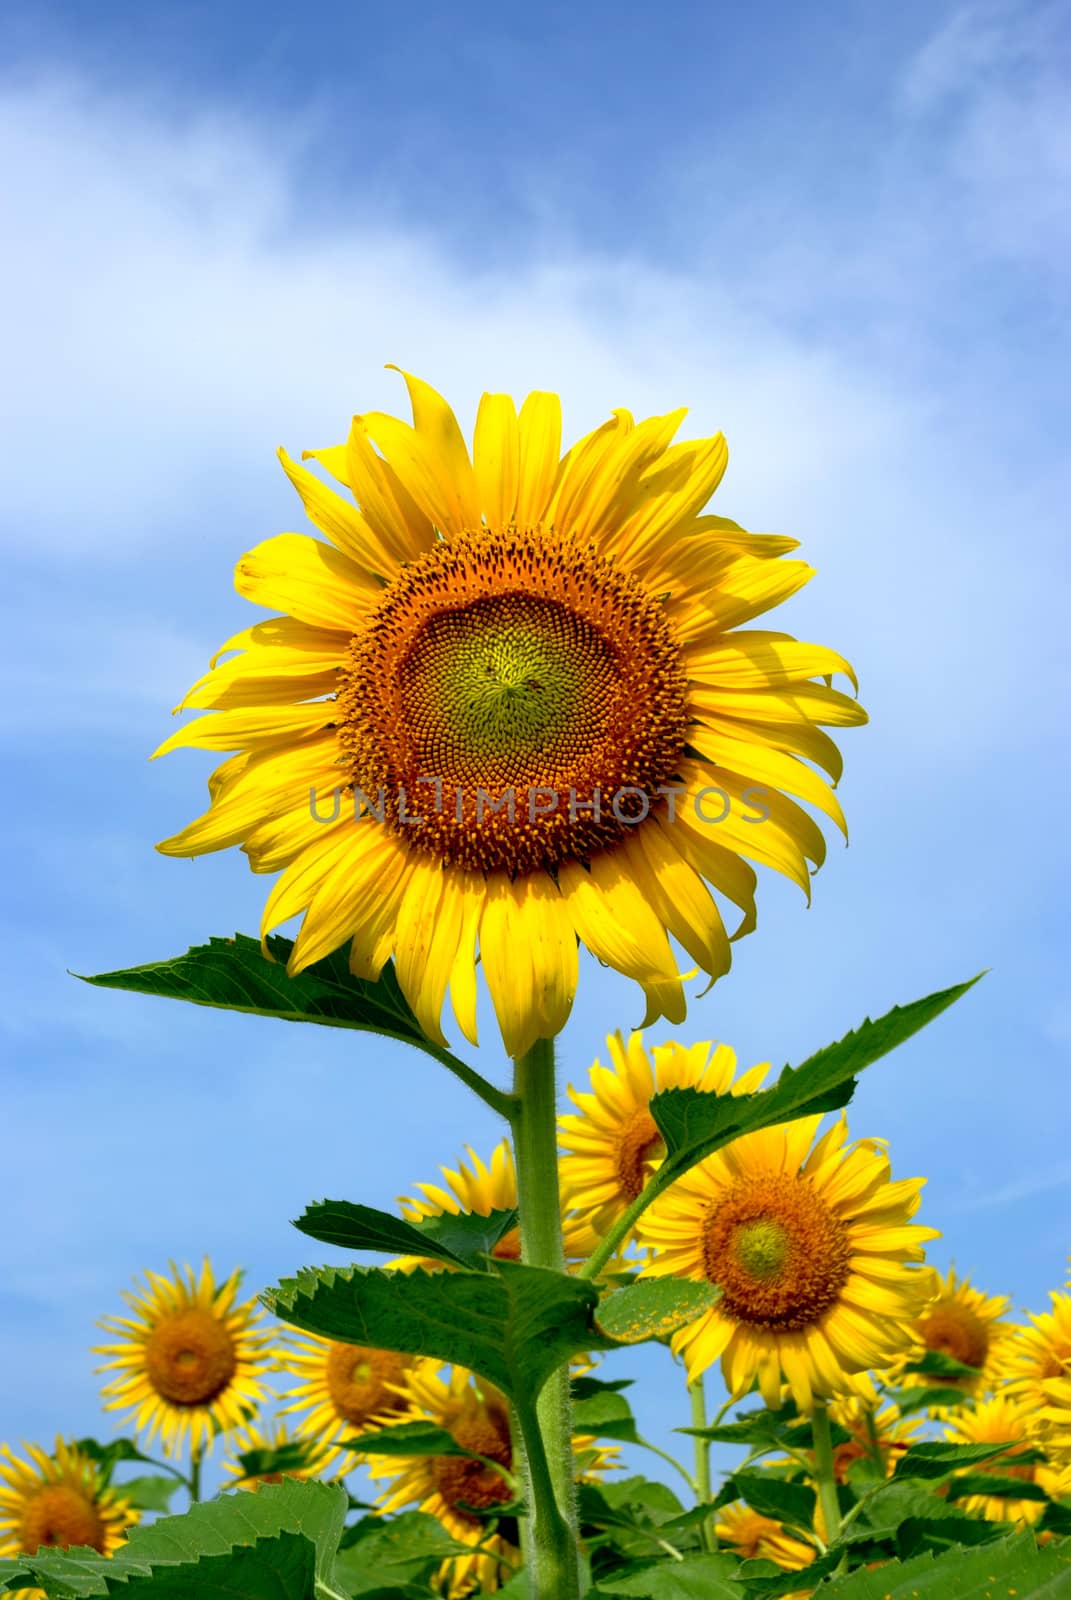 sunflower by ideation90